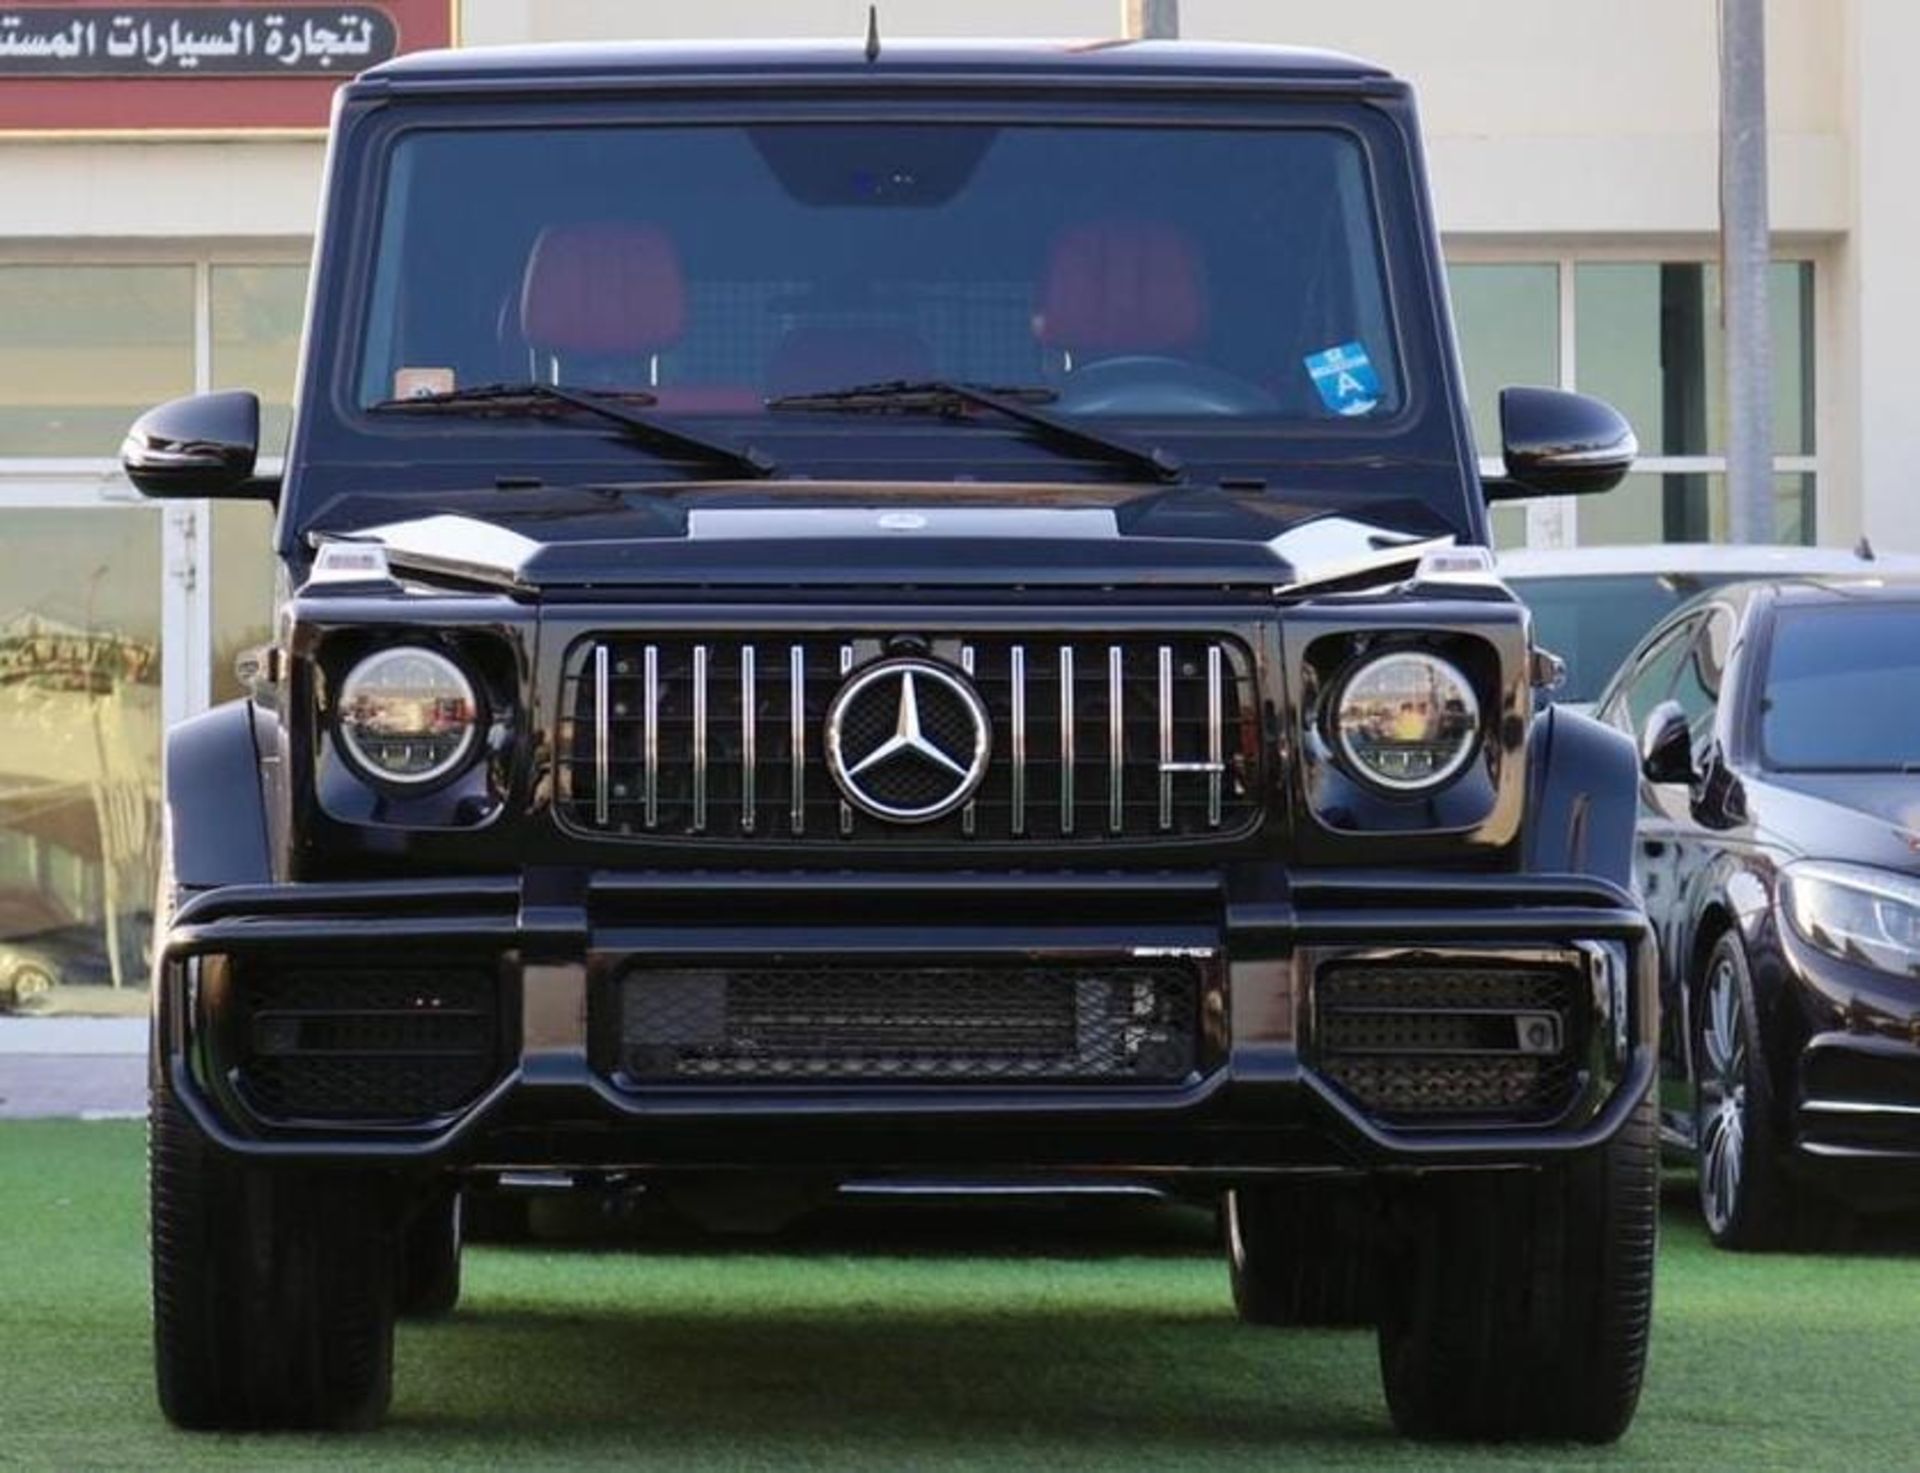 2011 MERCEDES G WAGON G55 changed to a 2020 G63 look Full outside exterior complete package !! - Image 2 of 36